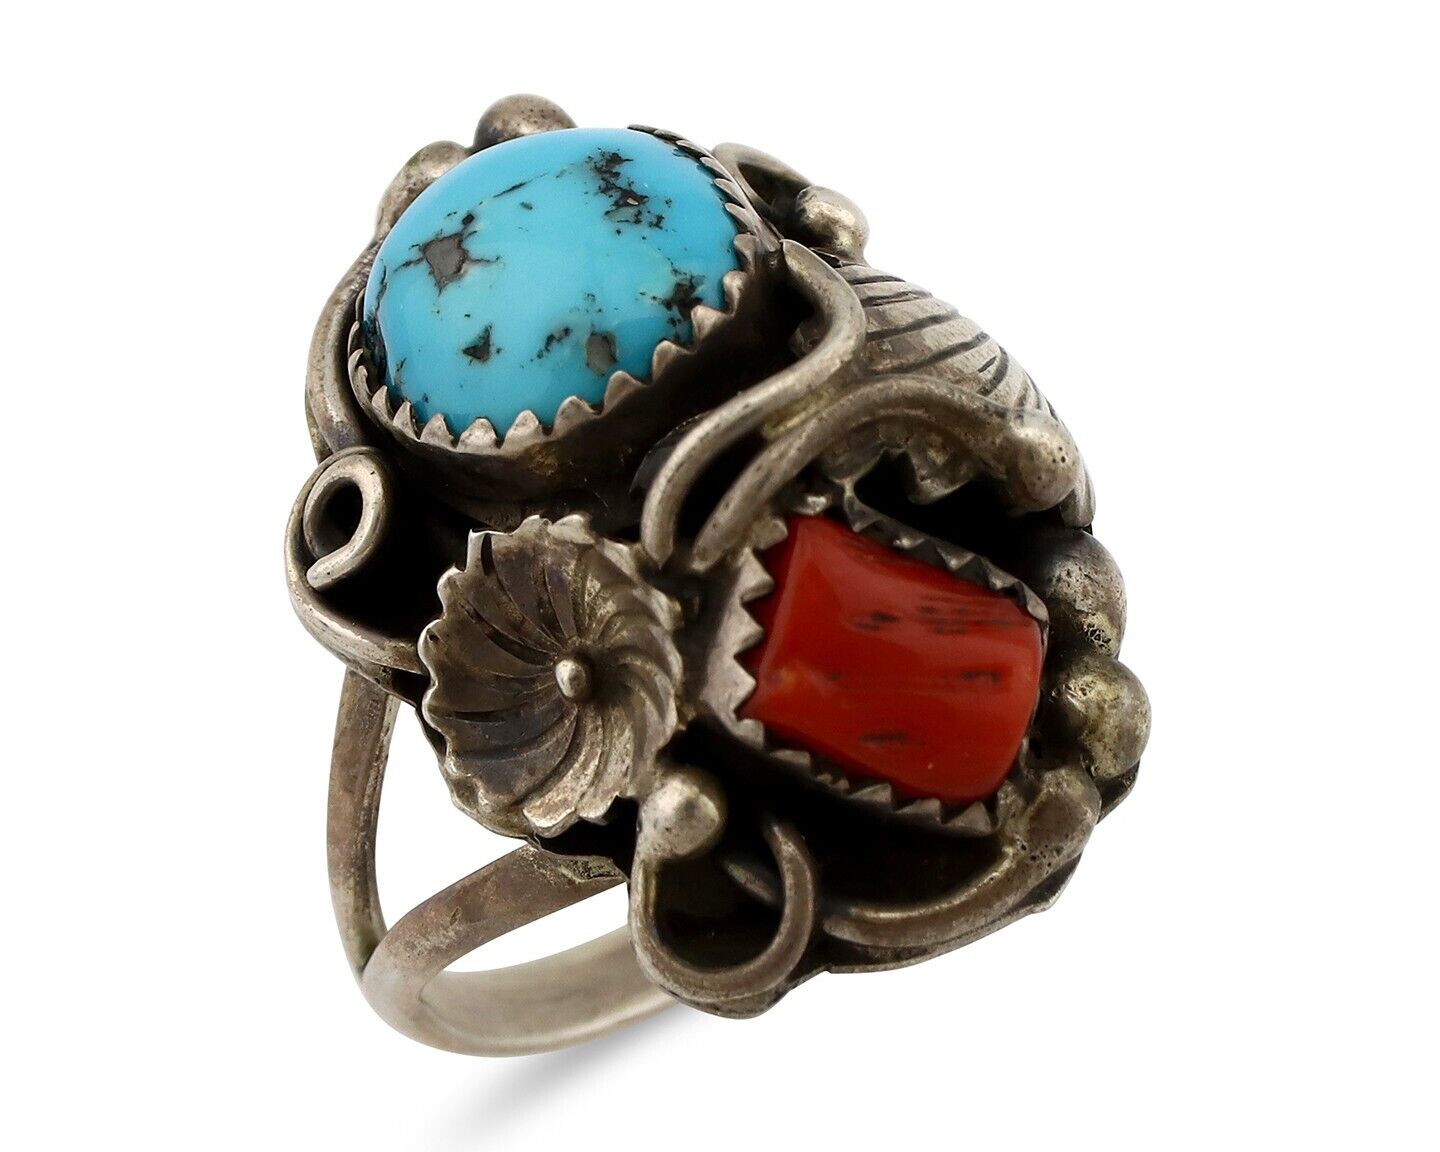 Navajo Handmade Ring 925 Silver Turquiose & Coral Artist Signed M C.80's